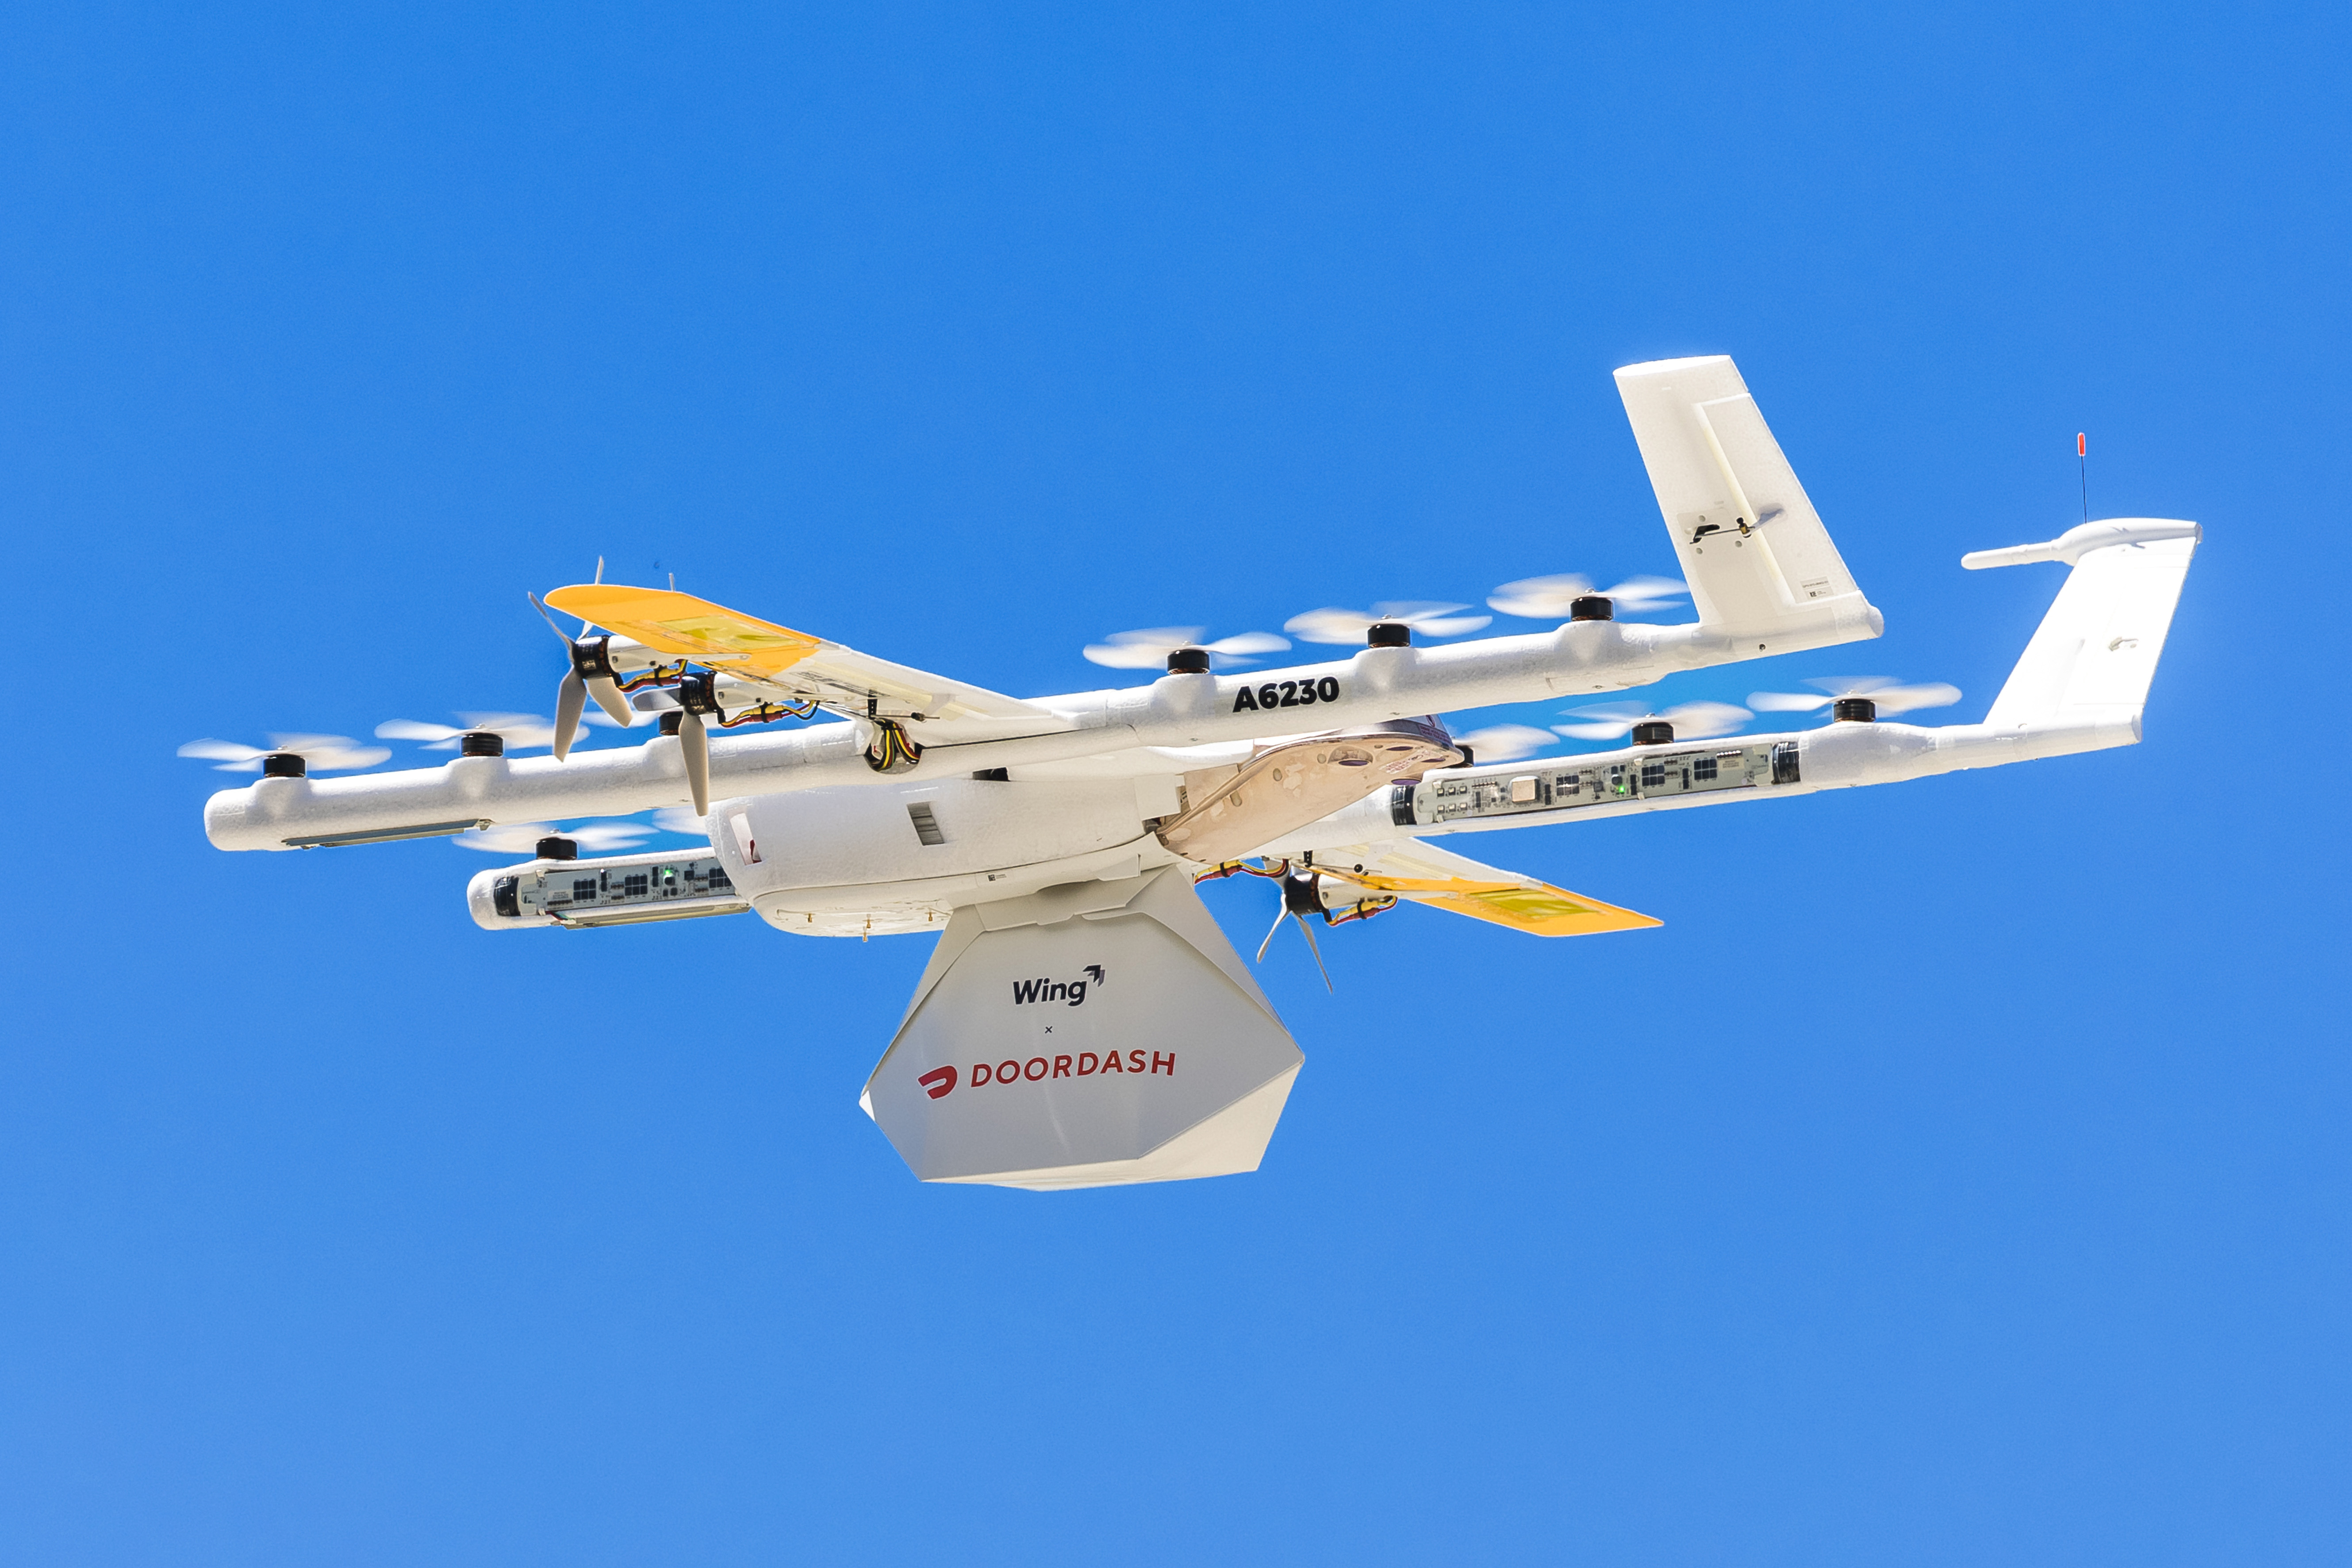 DoorDash is piloting drone deliveries with Wing in Australia